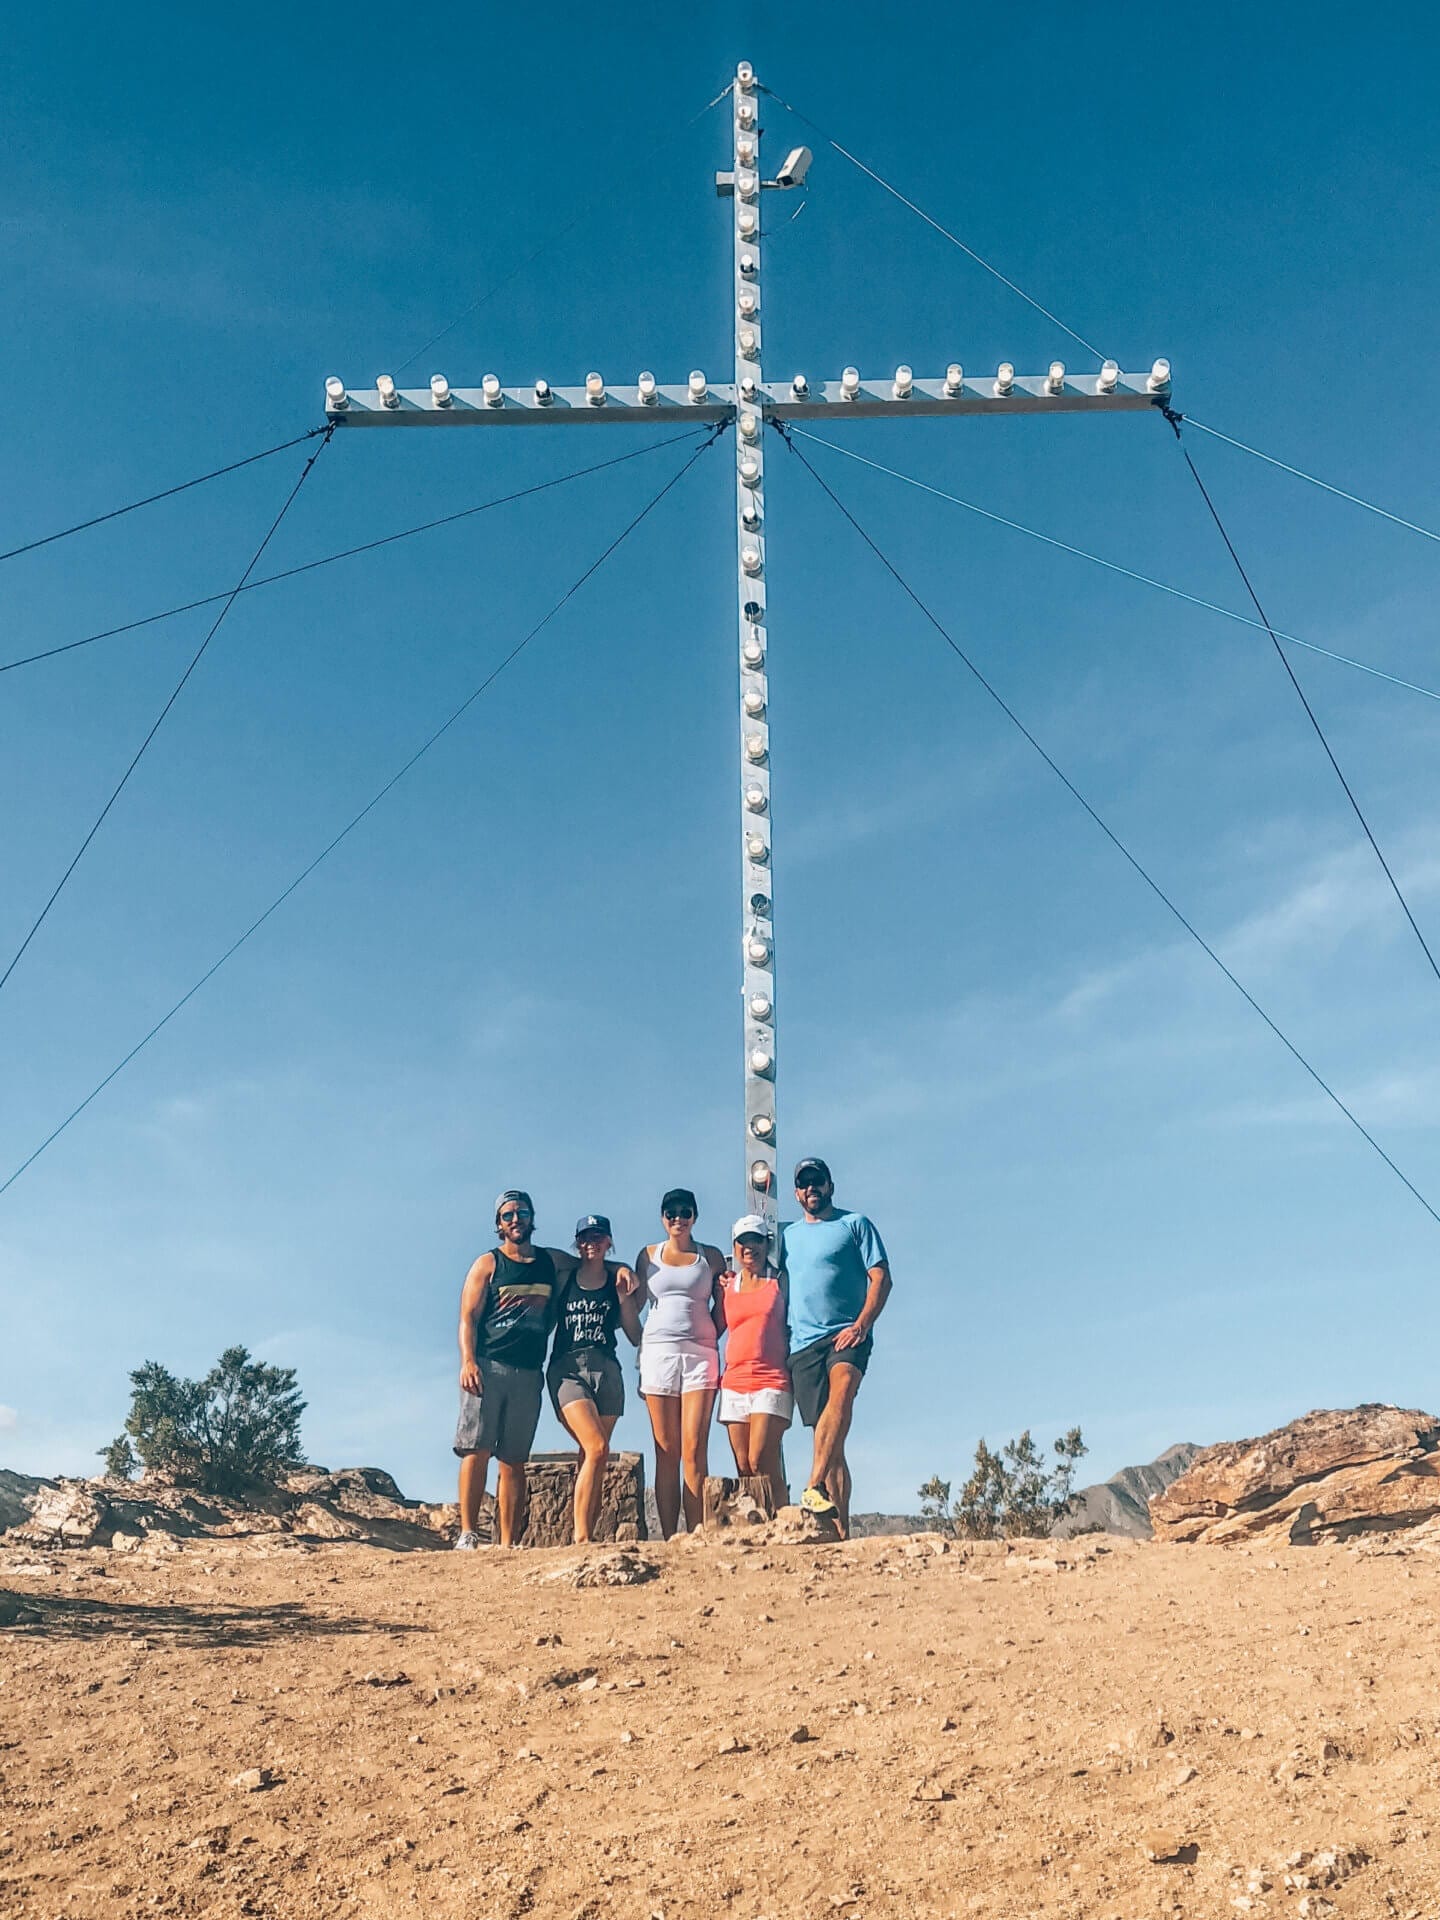 When you are in Palm springs, make sure to do the Cross Hike, as it is one of the top things to do